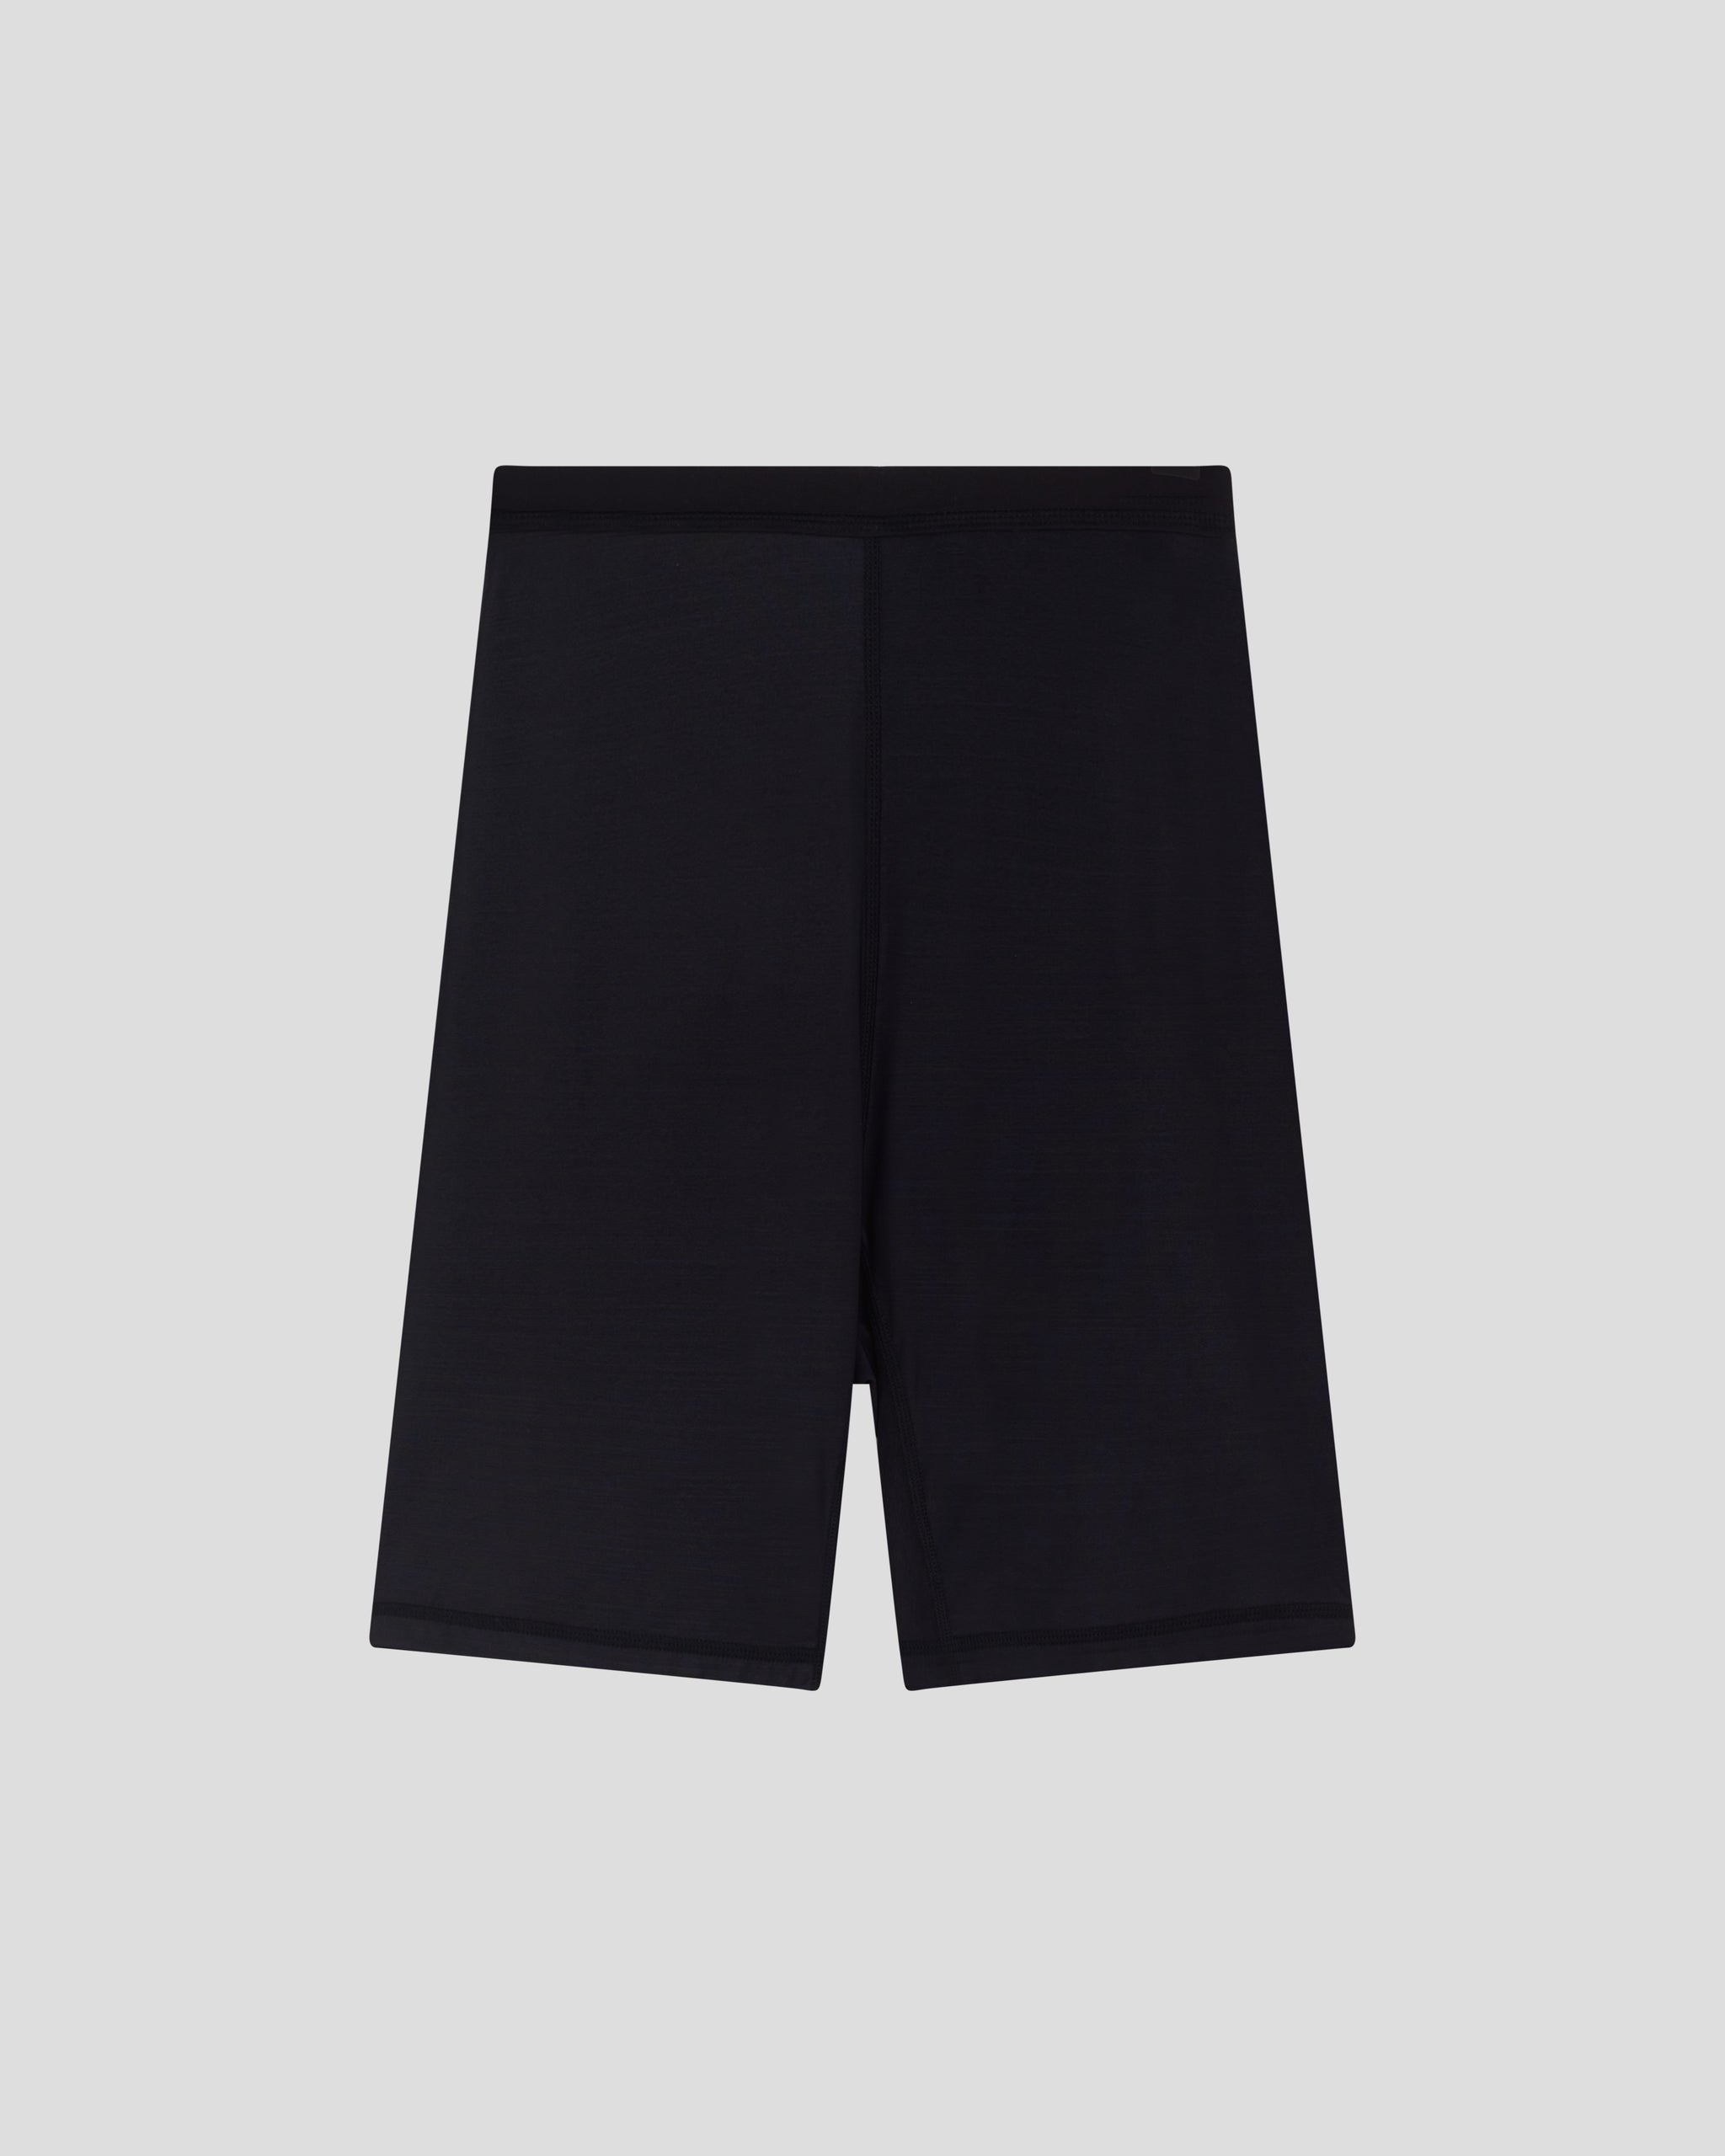 Barely-There Slip Shorts - Black